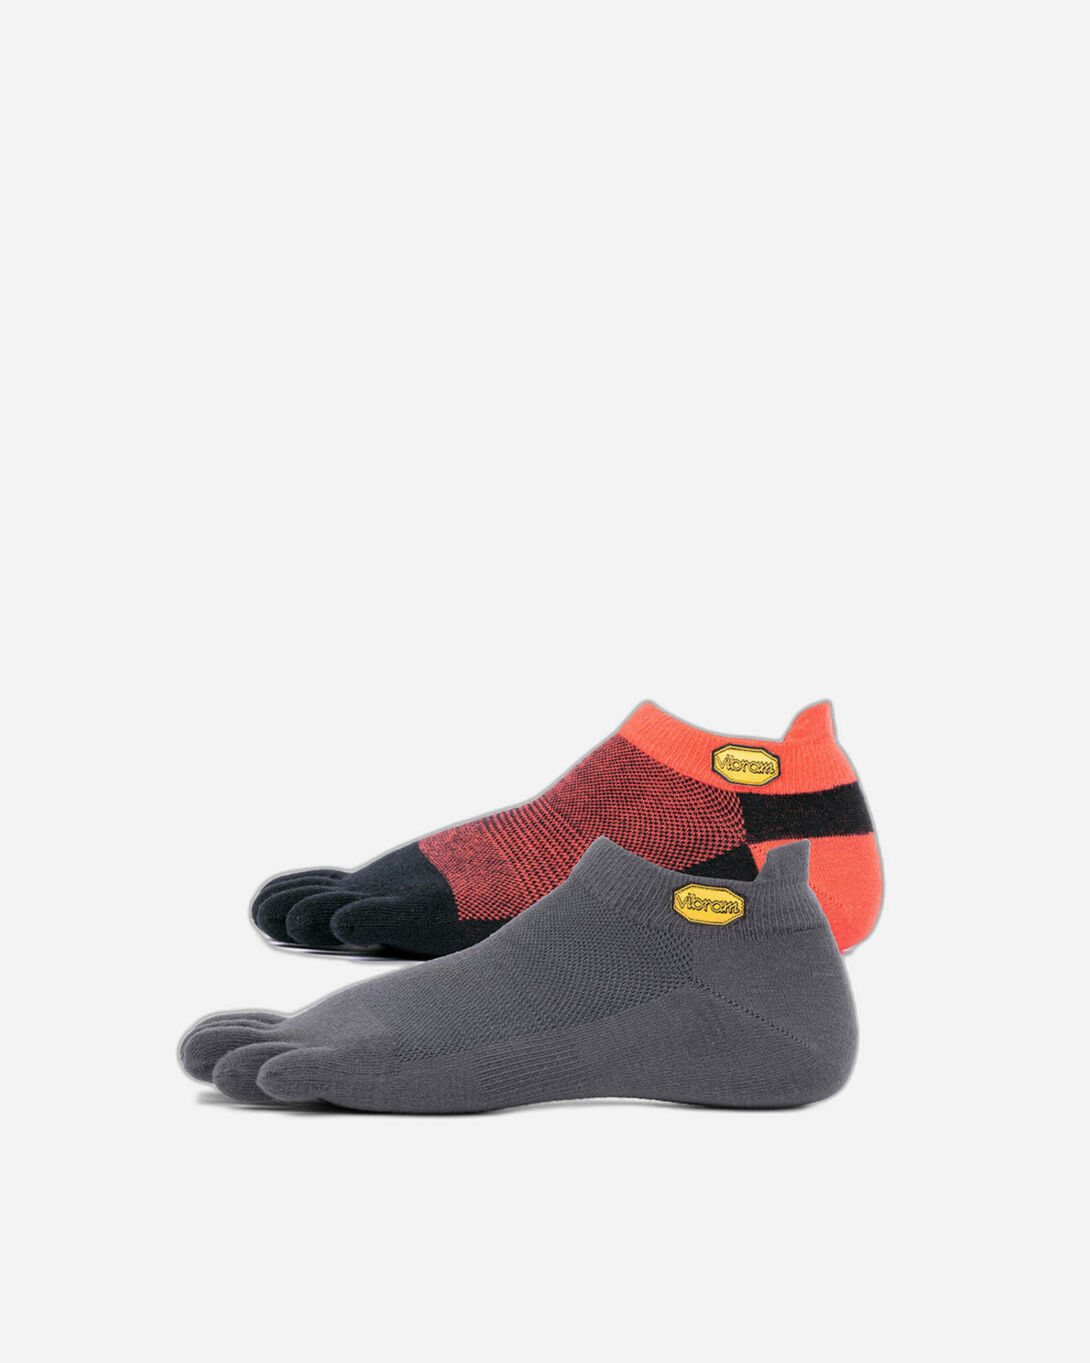 Barefoot Socks Made in Japan: 5 Reasons Why We Love Socks with